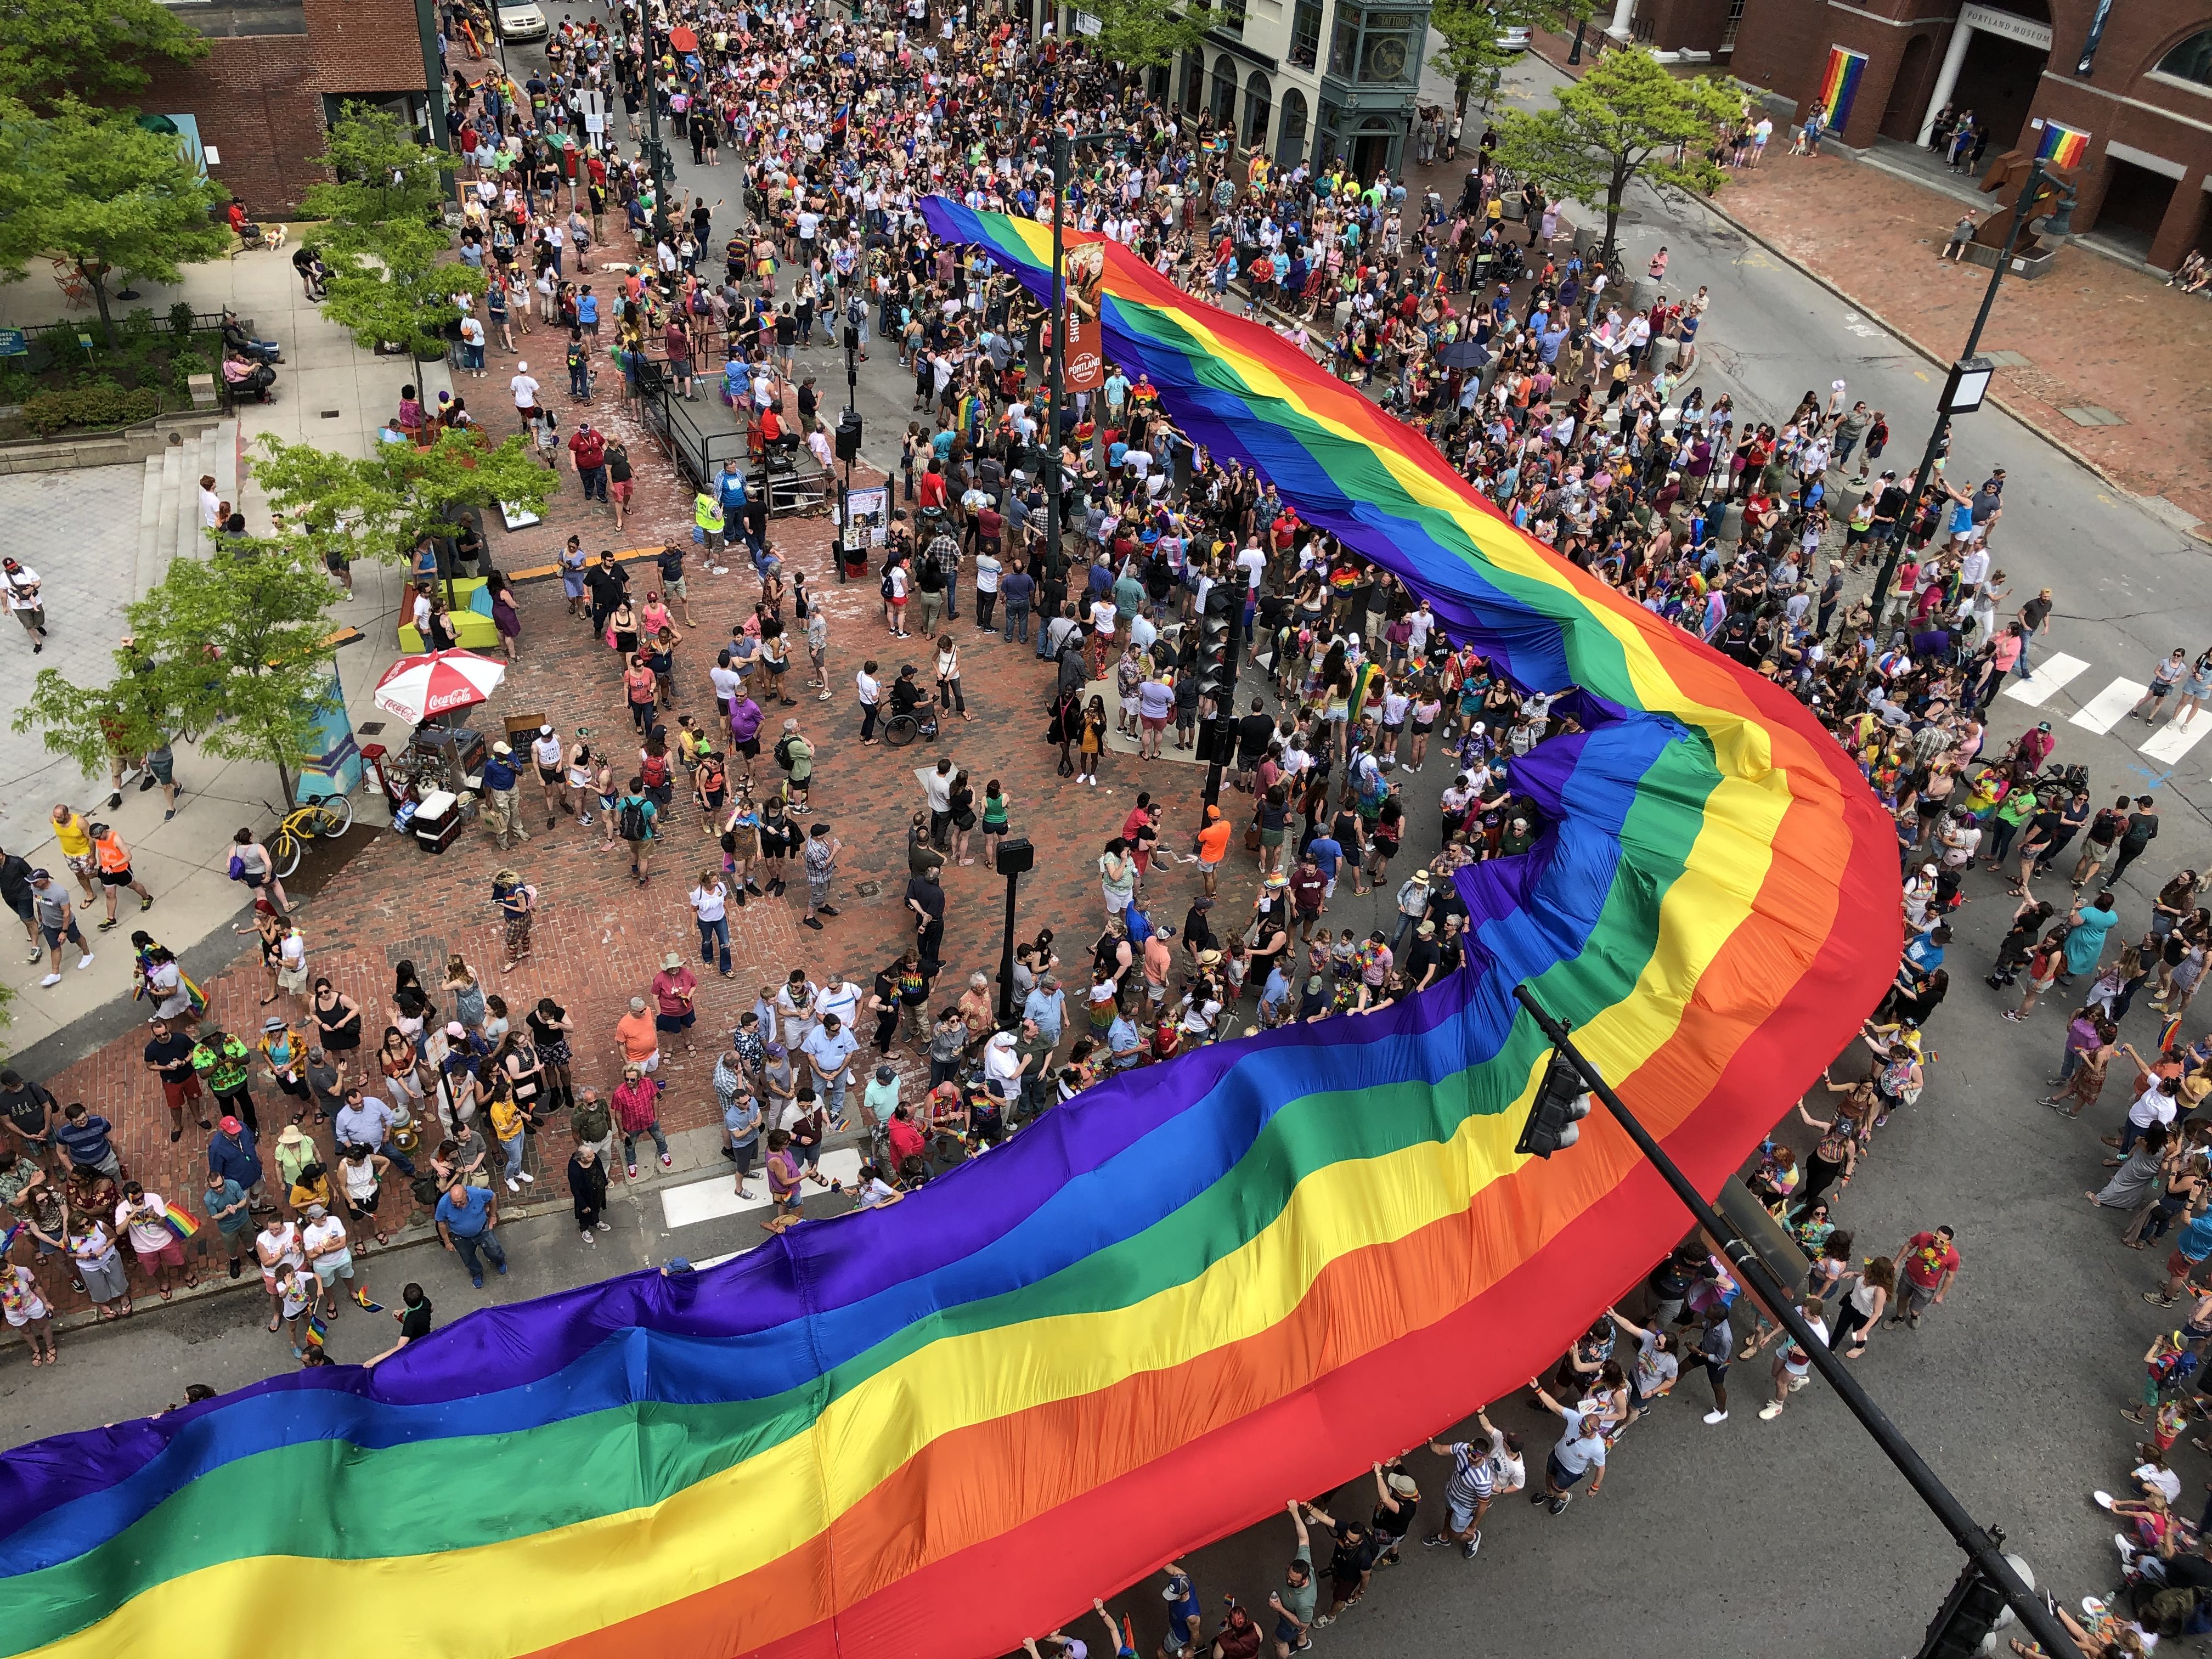 People holding up a rainbow banner in the streets of Portland ME